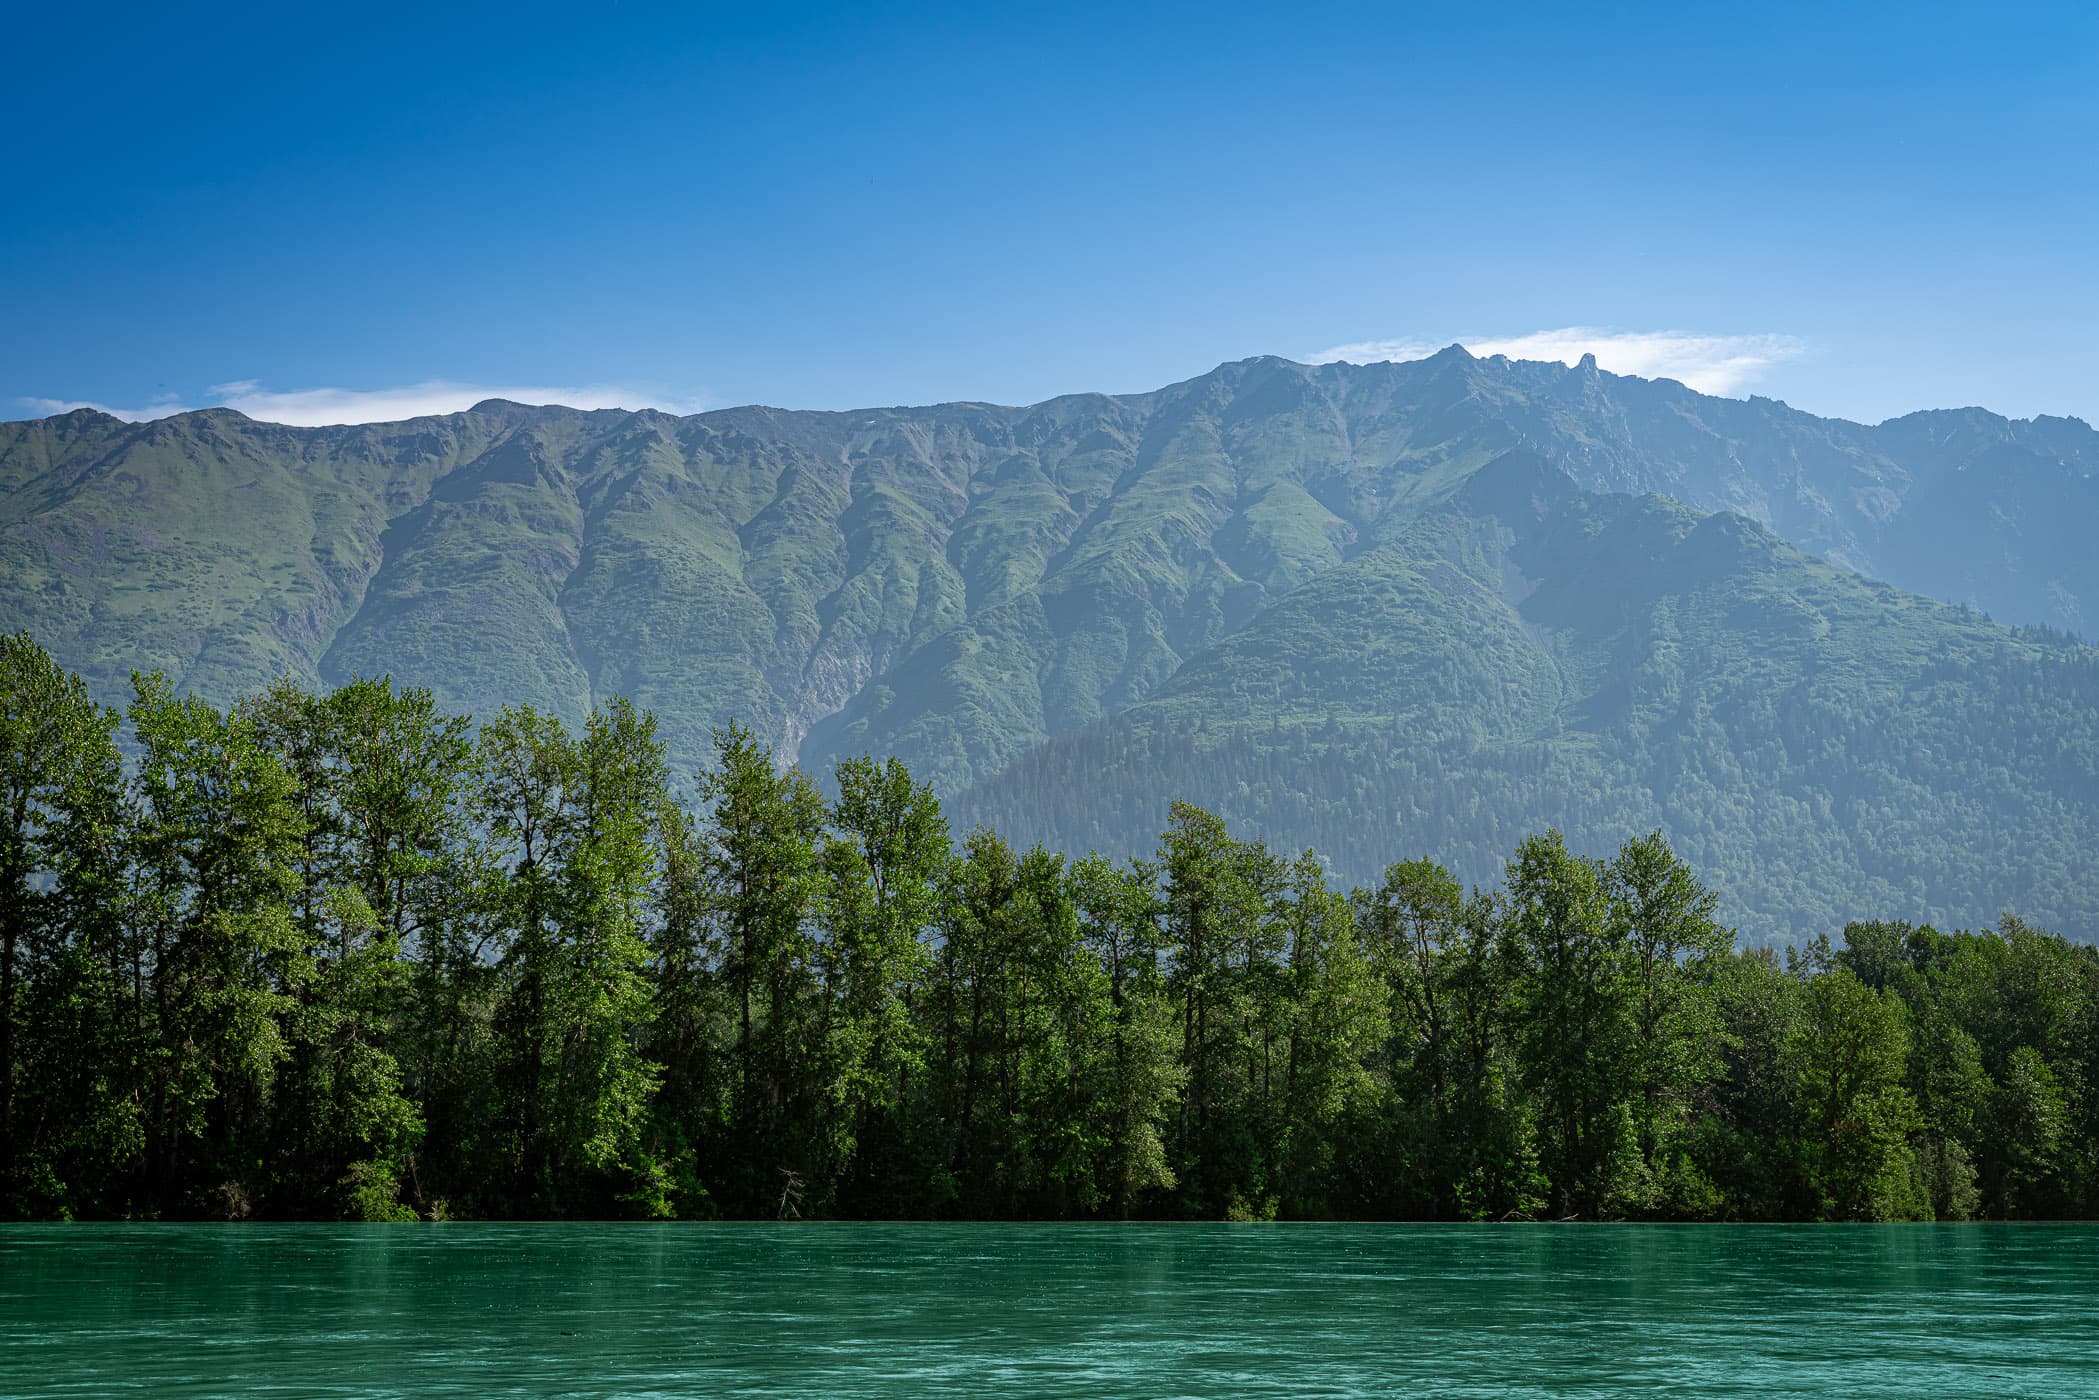 The mountains of the Chilkat Range rise over the nearby Chilkat River near Haines, Alaska.